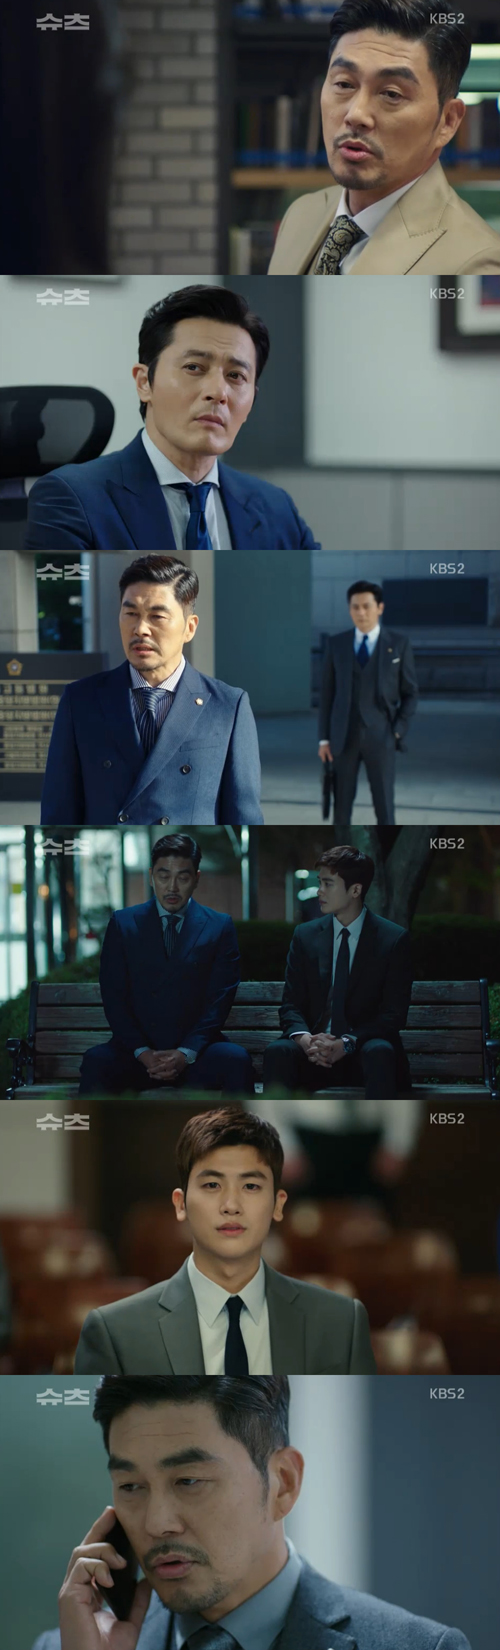 Suits Kim Yeong-ho provoked conflict between Jang Dong-gun and Park Hyeong-sikIn the KBS2 drama Suits, which was broadcast on the afternoon of the 31st, Choi Gang-seok (Jang Dong-gun) and Ko Yeon-woo (Park Hyeong-sik) were shown to have a conflict.Kim Young-ho, who came back to Kang & Ham, said, I amI was a pretty capable partner, but I was not morally mature. I committed embezzlement two years ago.I hope you know how it changed. I will think about what I can do for Kang & Ham. Kang Ha-yeon (Jin Hee-kyung) criticized Choi Kang-seok, who failed to stop Hams Come back.Choi is angry, choose whether to resign or send back Ko Yeon-woo (Park Hyeong-sik), he said.Choi said, The fact that the representative of the ship backed up quickly means that we are aware of our weaknesses. Now I need me and I need a good friend.I do not think Im going to be the second person. Everyone was wary of him when he backed to the law firm. Choi said to Ko Yeon-woo, Do not act as a representative of the ship.So when he looked worried, he said, You are not my weakness, so it does not happen right now.After the back of Ham, the first meeting of Kang & Ham was held, and the direction of the long strike at Haram Nursing Home was discussed.Thats the case Im in charge of, said Choi Kang-seok, who was embarrassed.He replied, but Ham said, Who is not in charge of it?After the meeting, Choi Kang-seok filled the case document and visited the fleet table. He handed the document to the representative and replied, Do not touch my case.I can see all the cases. He warned, In the end, you will have to learn to respect me. Ham reversed the ruling that Choi Kang-seok had dismissed the lawsuit, which he was in charge of. Choi Kang-seok, who later visited the court, asked Ham, What are you doing now?Ham said, If you understand that I have changed, I will be seriously hurt.Ham met Ko Yeon-woo in a hospital where Ko Yeon-woo was located. He said, Choi said you are the right person to persuade Union chairperson.I heard that it is a chick, but I can turn my mind to the other person. I am confident that I will meet with Union chairperson and persuade him, and Ko Yeon-woo expressed confidence that he would do it once.He met with the hospital Union chief person and said, I heard from my grandmother how hard the nurses are.I am responsible for 15 patients per nurse, Union chief person said. I will withdraw the strike and negotiate.The fact that he solved the case was exciting, but Choi did not welcome it.He met with Union chairperson and handed the dismissal notice to Union chairperson, referring to the culture of burning (a term referring to a discipline culture tame by harassment, etc., in the course of a senior nurse teaching a new nurse).So, he went to Choi Kang-seok and said, It is my lawyer who used me. This is betrayal. Choi Kang-seok said, You are deceived by the representative.I did not see this when I met Ham, but I did not see it. Ko Yeon-woo, who was upset, said, I do not want to play in emotional fighting.Meanwhile, Suits is broadcast every Wednesday and Thursday at 10 pm.Photo  Capture KBS2 Broadcasting Screen